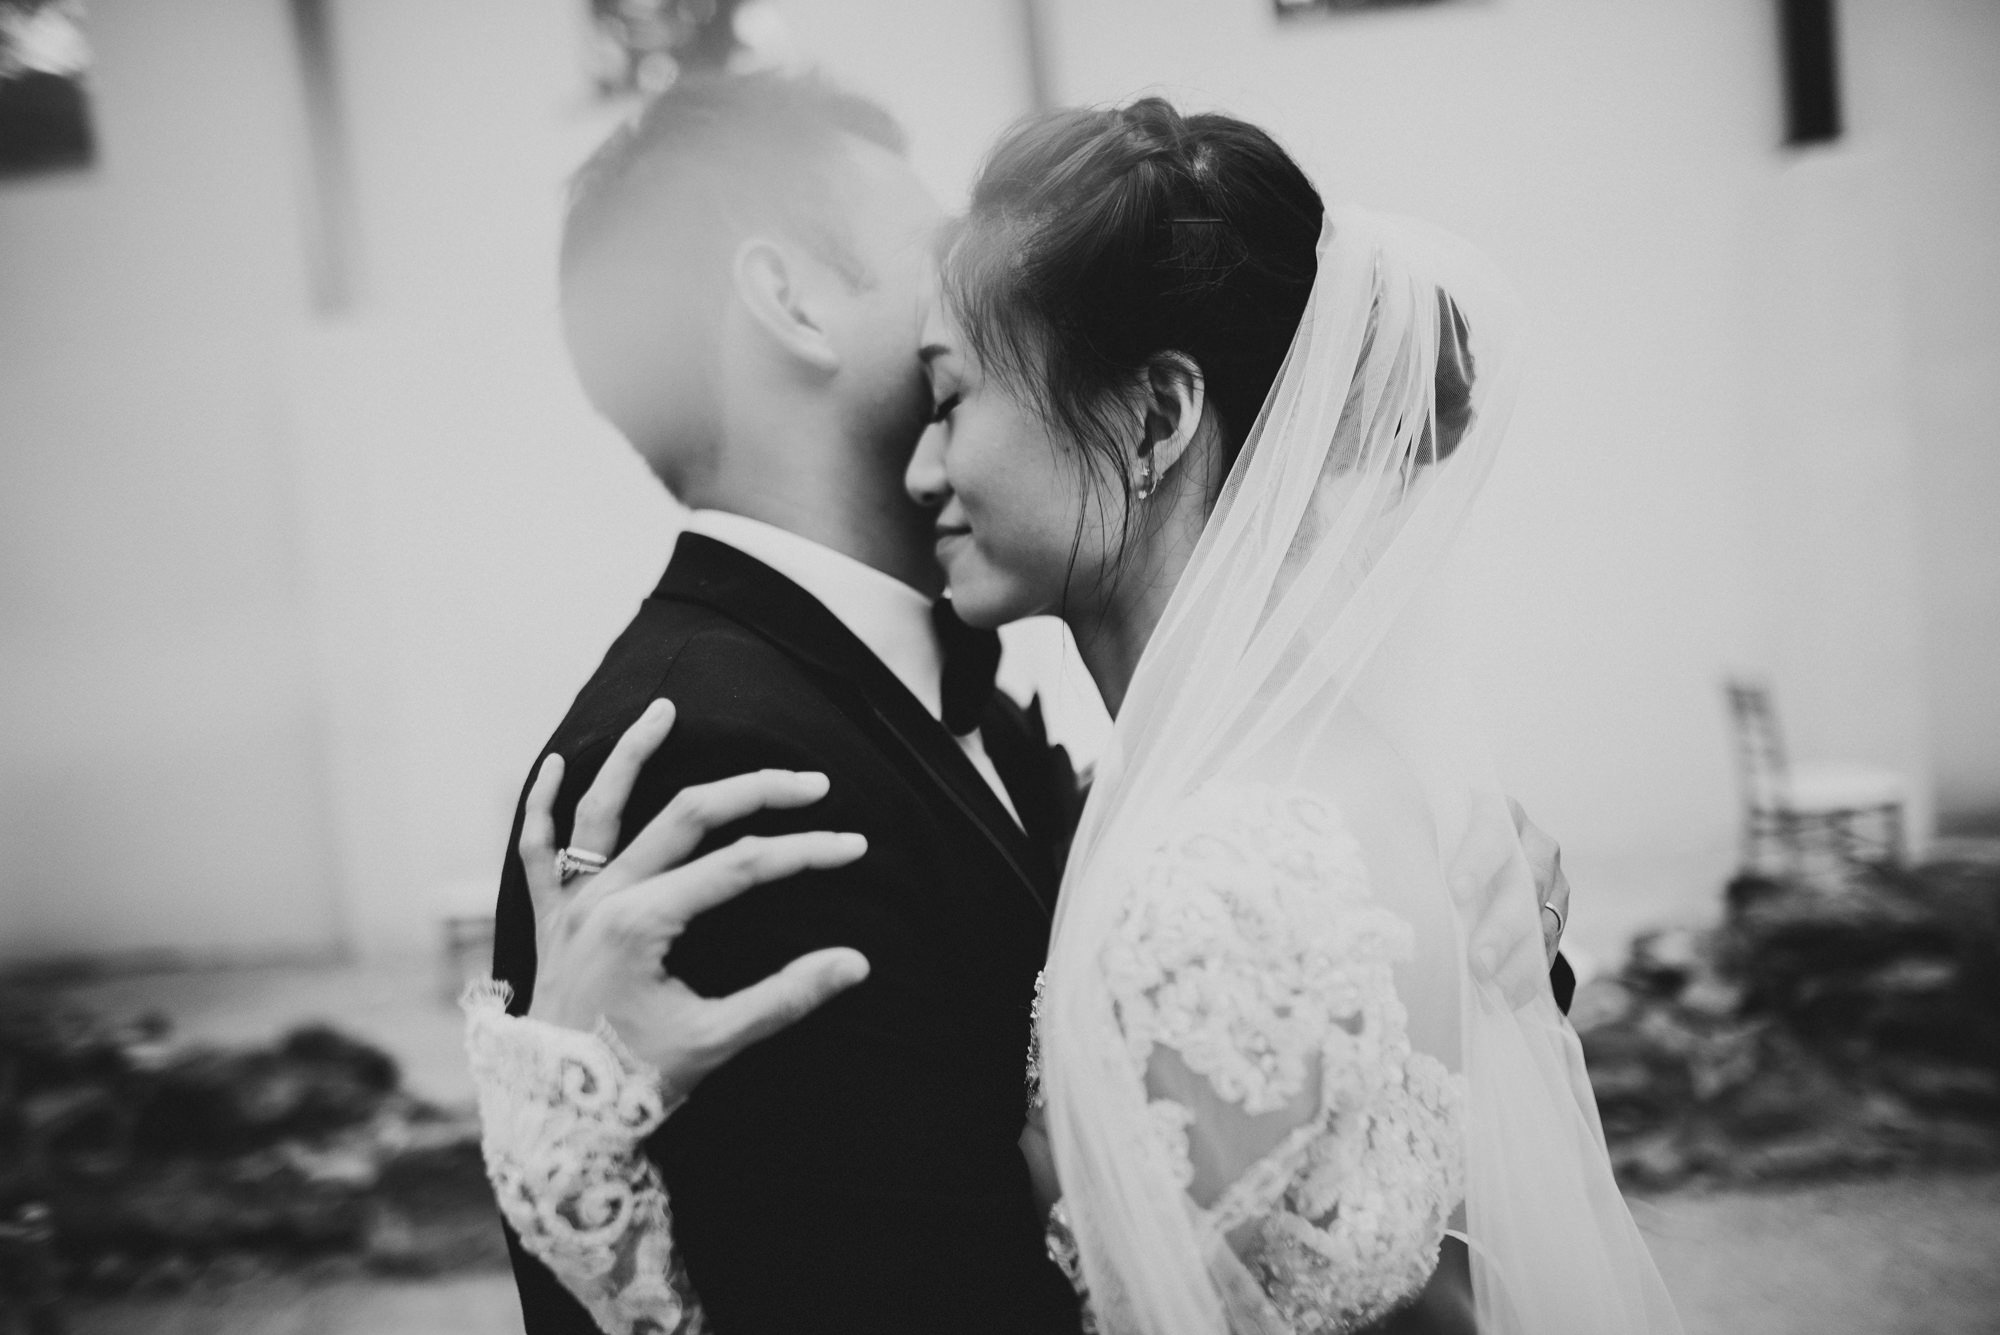 There's something extraordinary about capturing the raw emotion of a wedding day. The nervous energy before the walk down the aisle, the pure joy of saying &quot;I do,&quot; and the unbridled happiness in a stolen kiss &ndash; these are the moments t